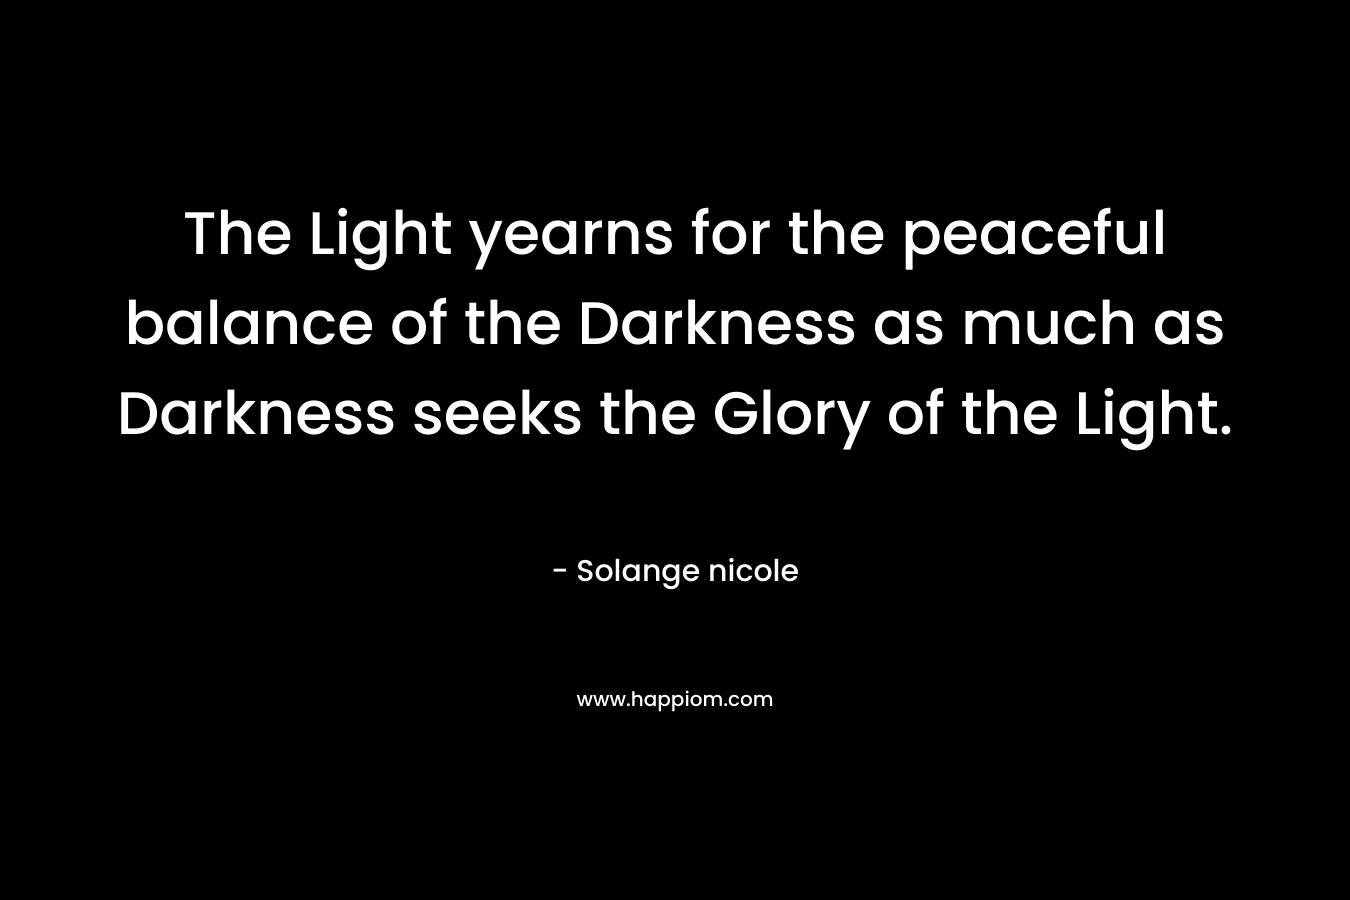 The Light yearns for the peaceful balance of the Darkness as much as Darkness seeks the Glory of the Light.